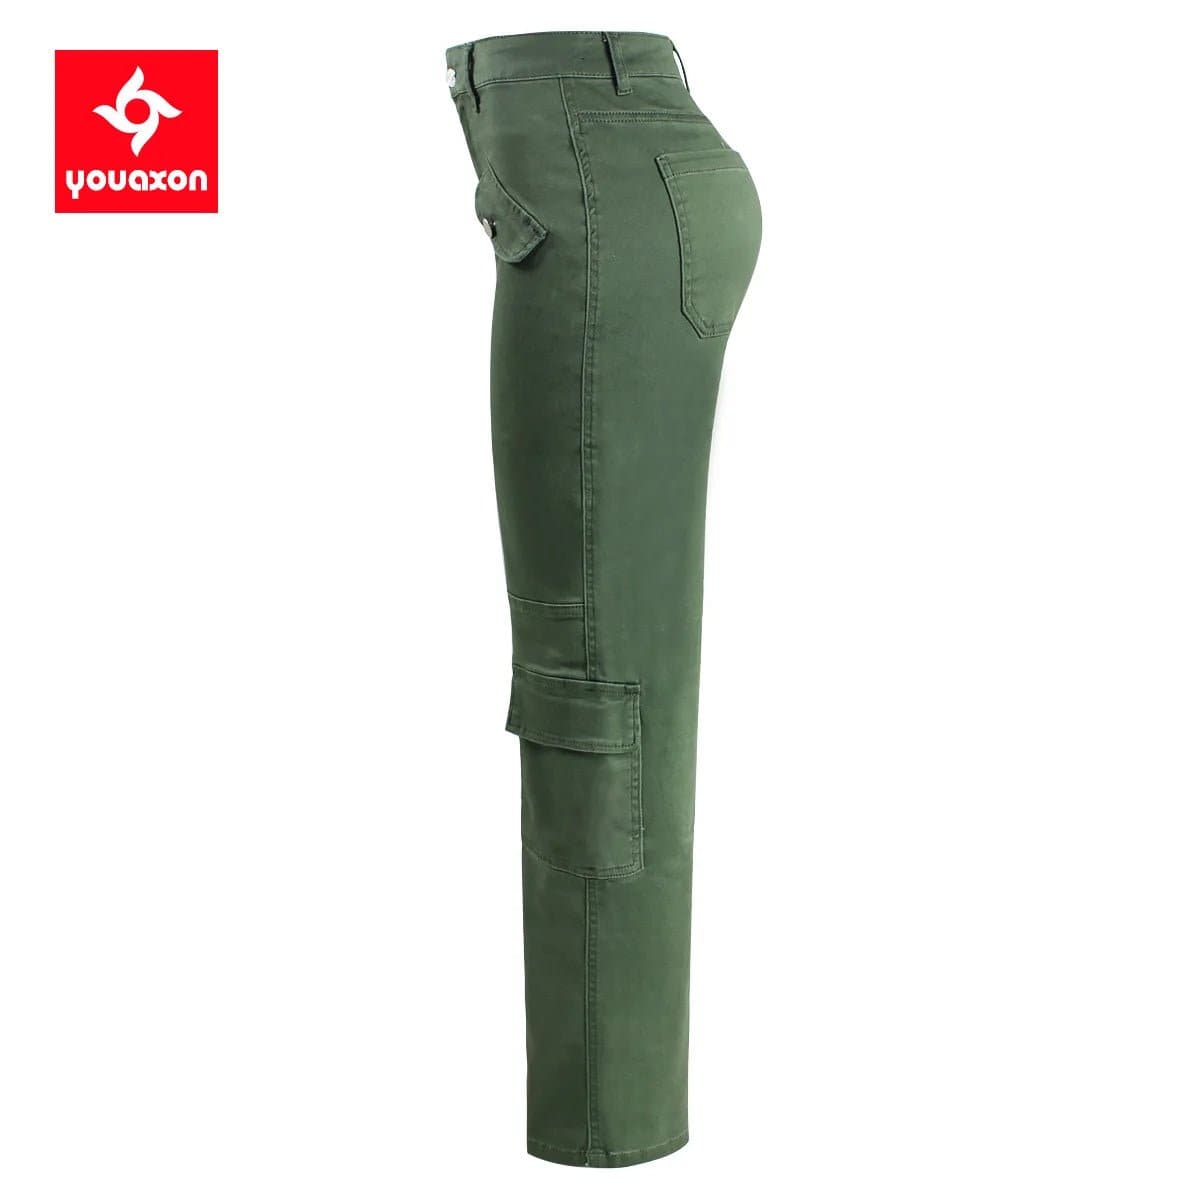 Stretchy Cargo Pants - Wandering Woman